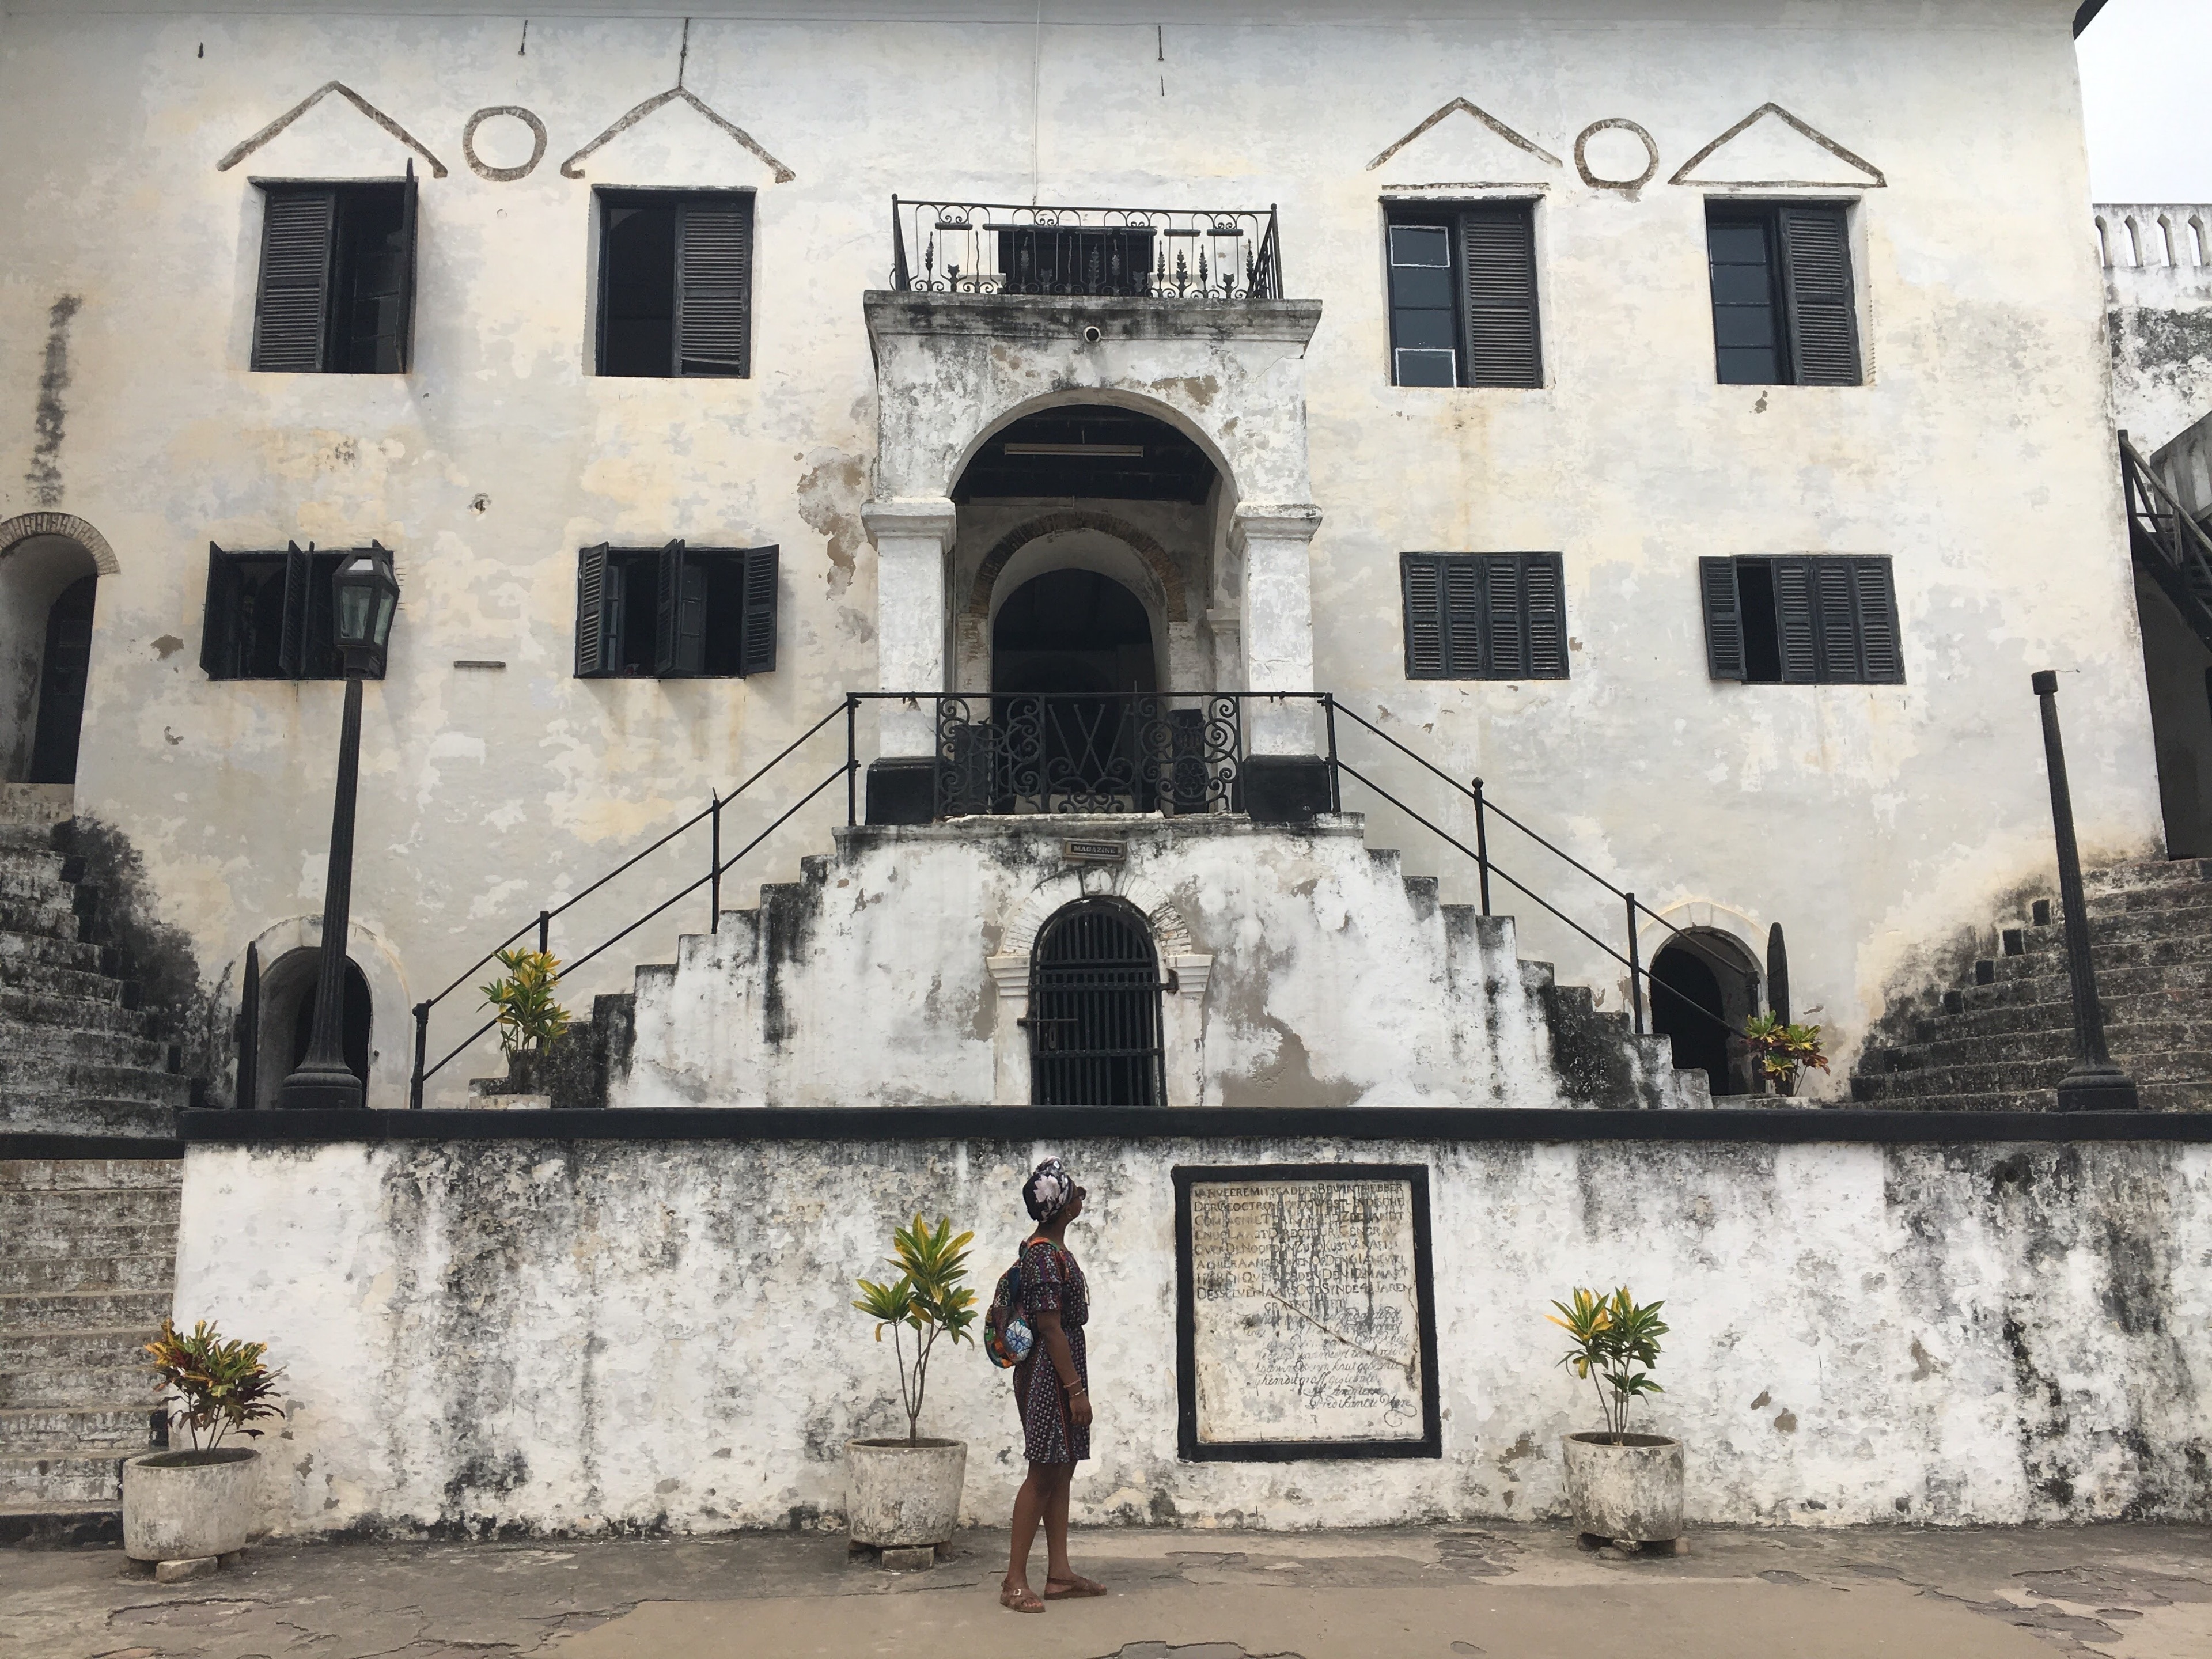 Elmina Castle was built by the Portuguese in Cape Coast, Ghana in the 1400s to ship africans during the slave trade. Many left their homeland through this castle and sadly, never returned. It now stands as a historical museum open to the public. #culture #ghana #travel